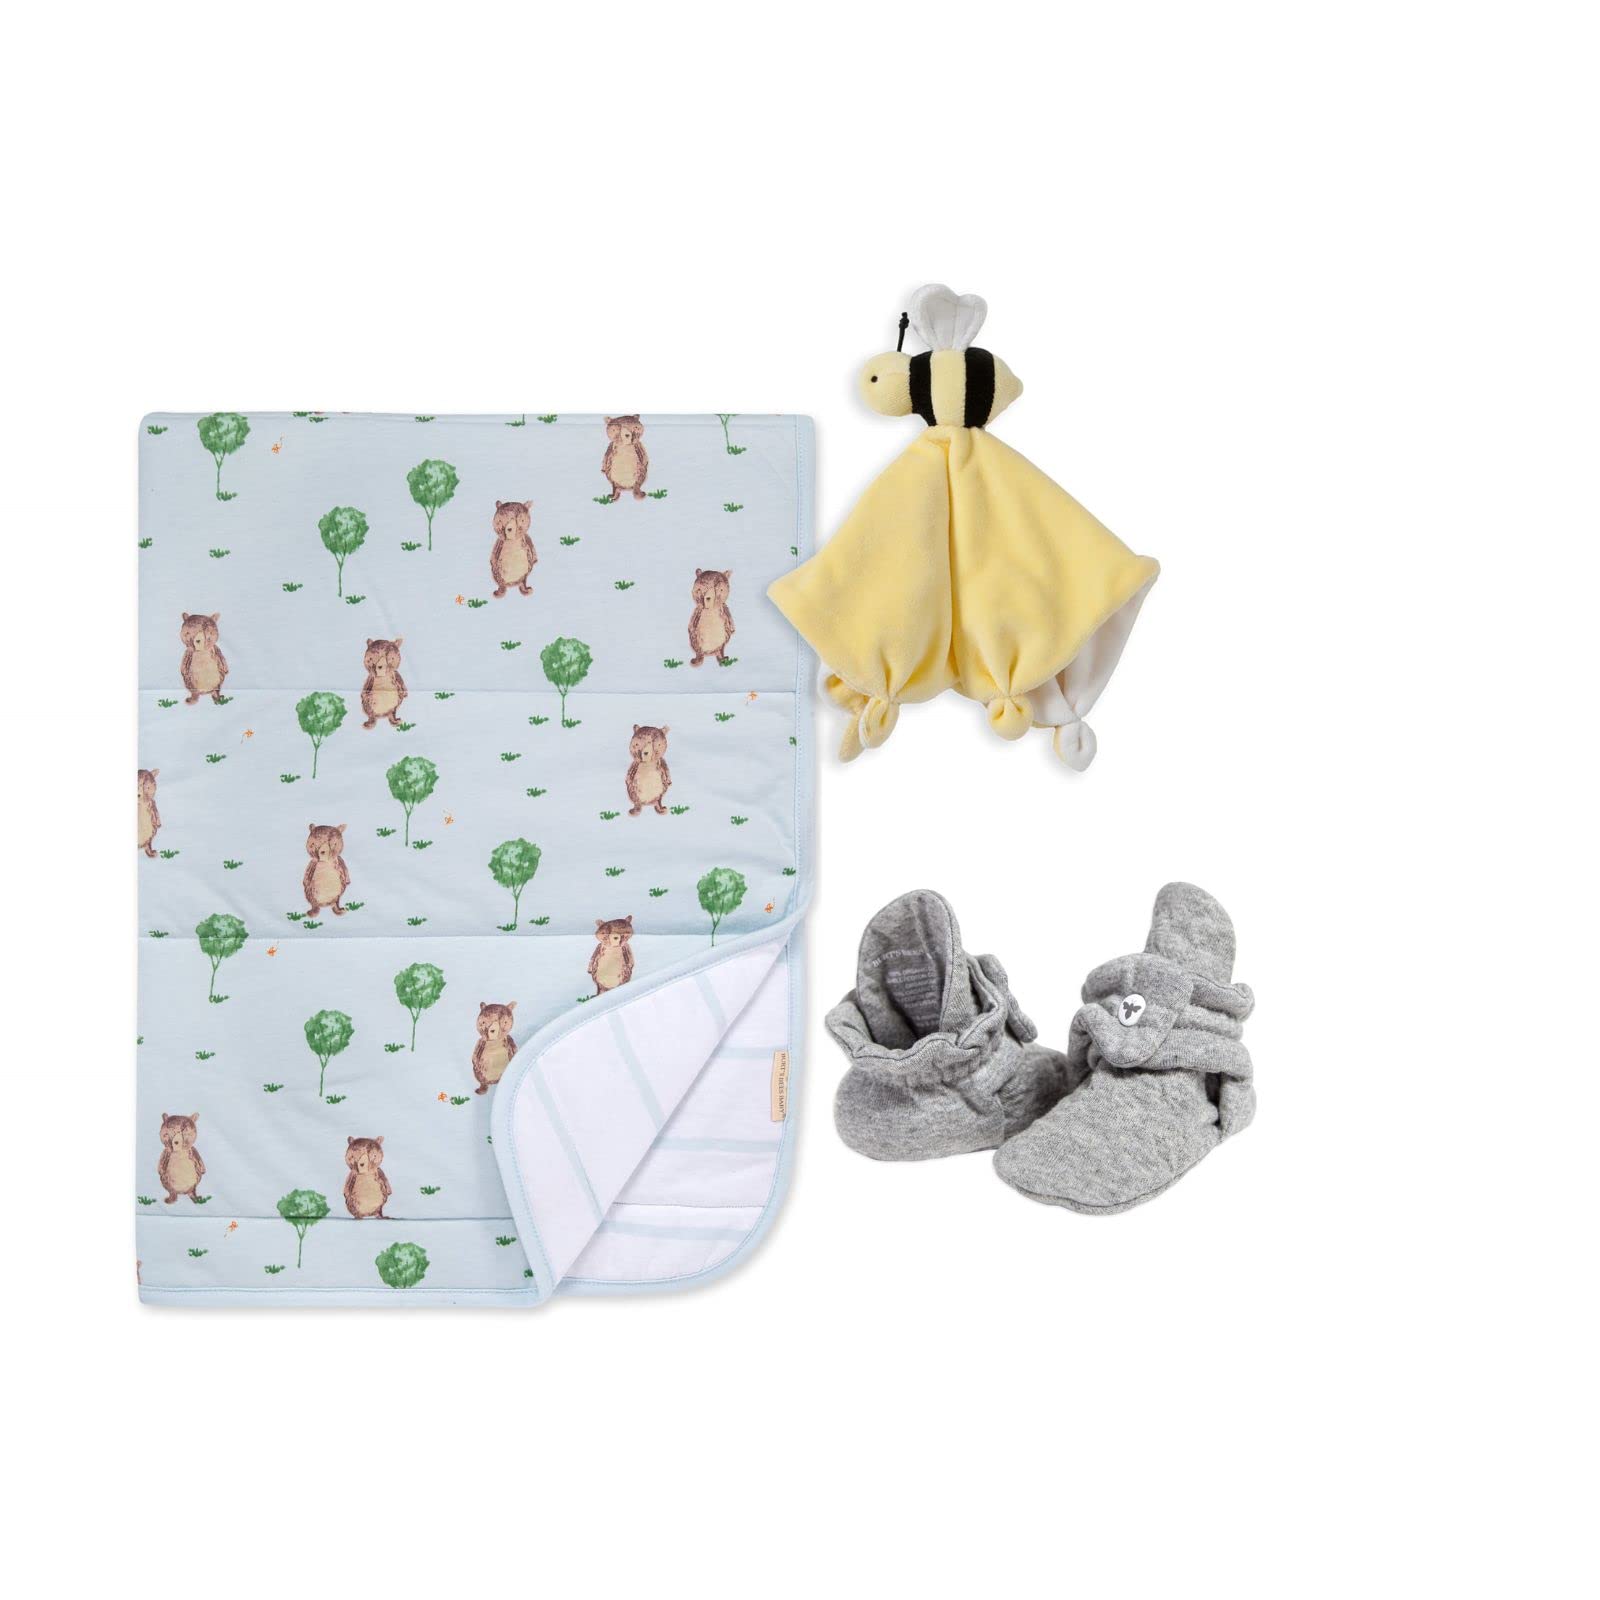 Burt's Bees Baby Unisex Organic Cotton Essentials Gift Set w/ Reversible Jersey Blanket, Adjustable Infant Booties & Plush Bee (Storybook Bear) $21.55 + FS w/ Prime or $25+